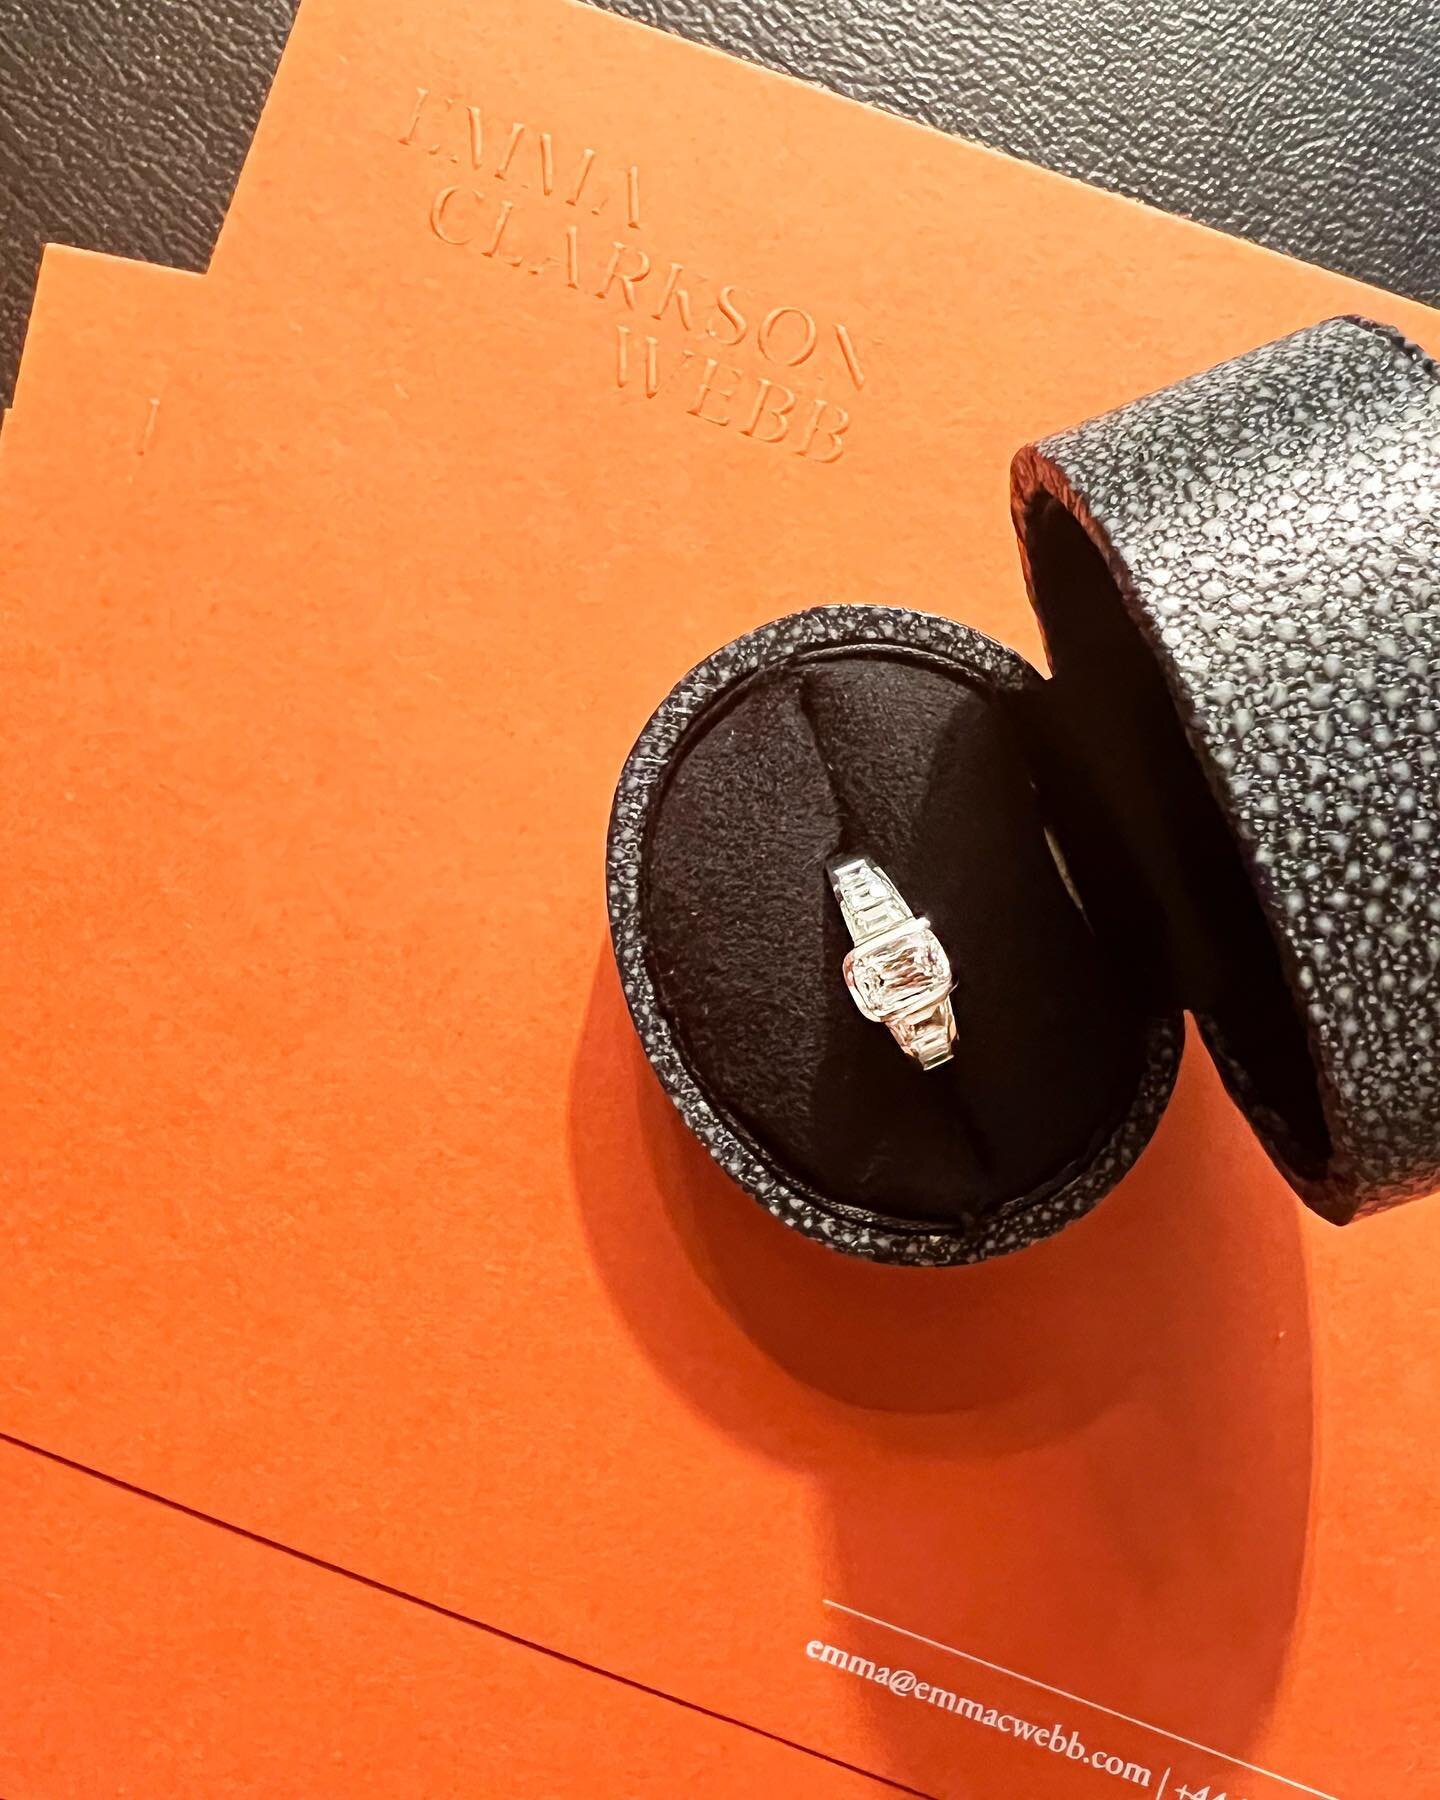 For Layla 〰️ an 18k white gold engagement ring with a unique criss cross cut hybrid central diamond and custom cut tapering baguettes channel set to the shoulders. Plus some shiny new branded stationary 🧡

#emmaclarksonwebb #bespokejewellery #engage